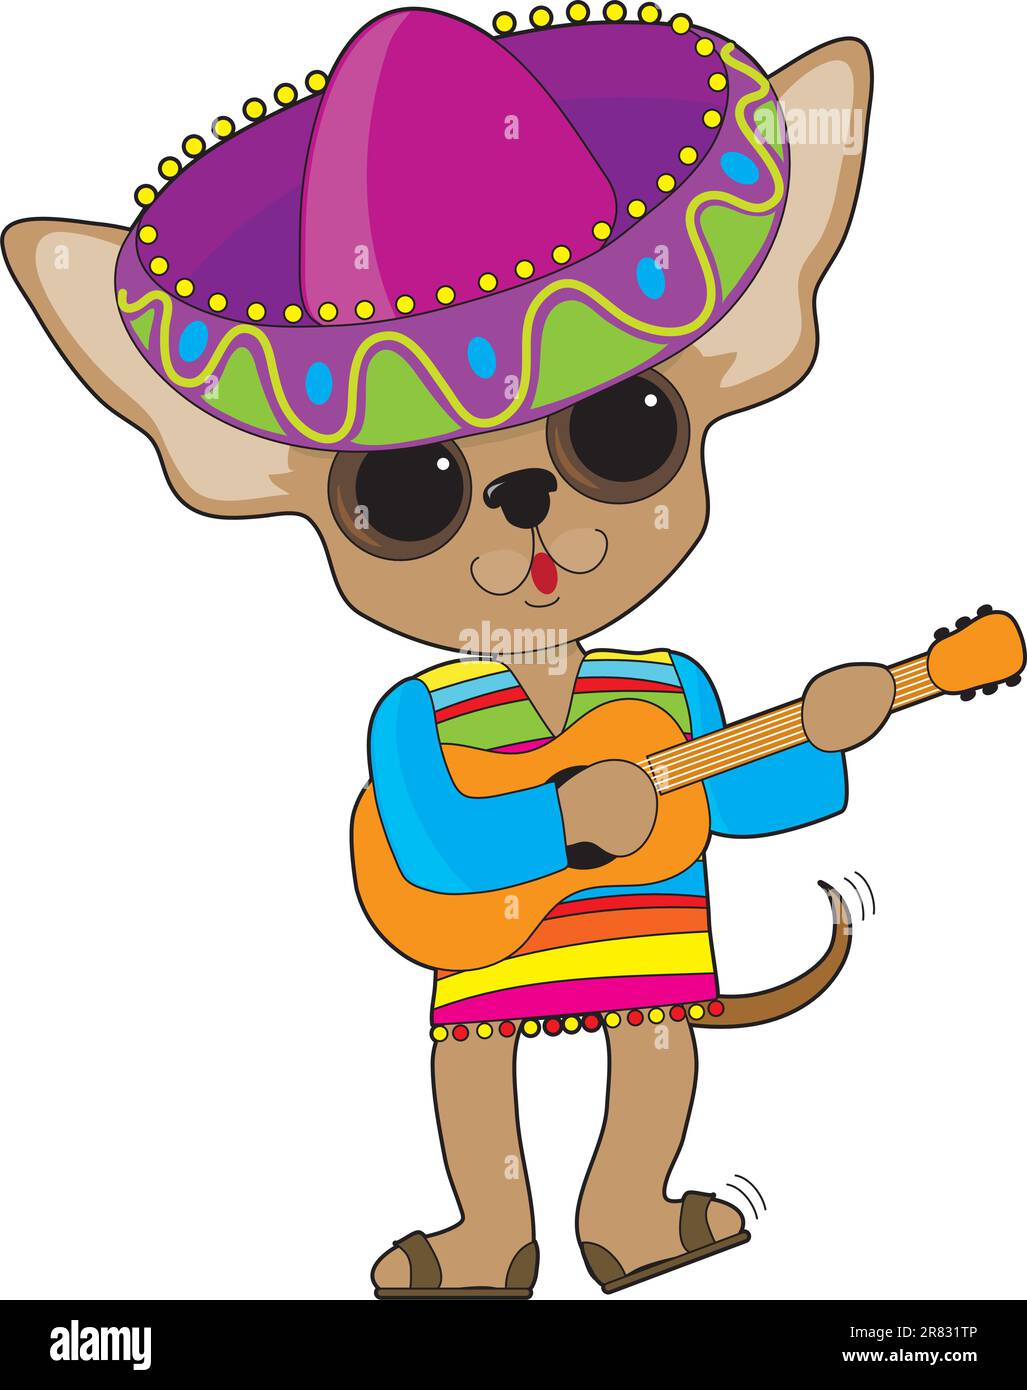 A happy Chihuahua with foot tapping and tail wagging, is playing the guitar while in show costume, complete with a large Mexican sombrero. Stock Vector